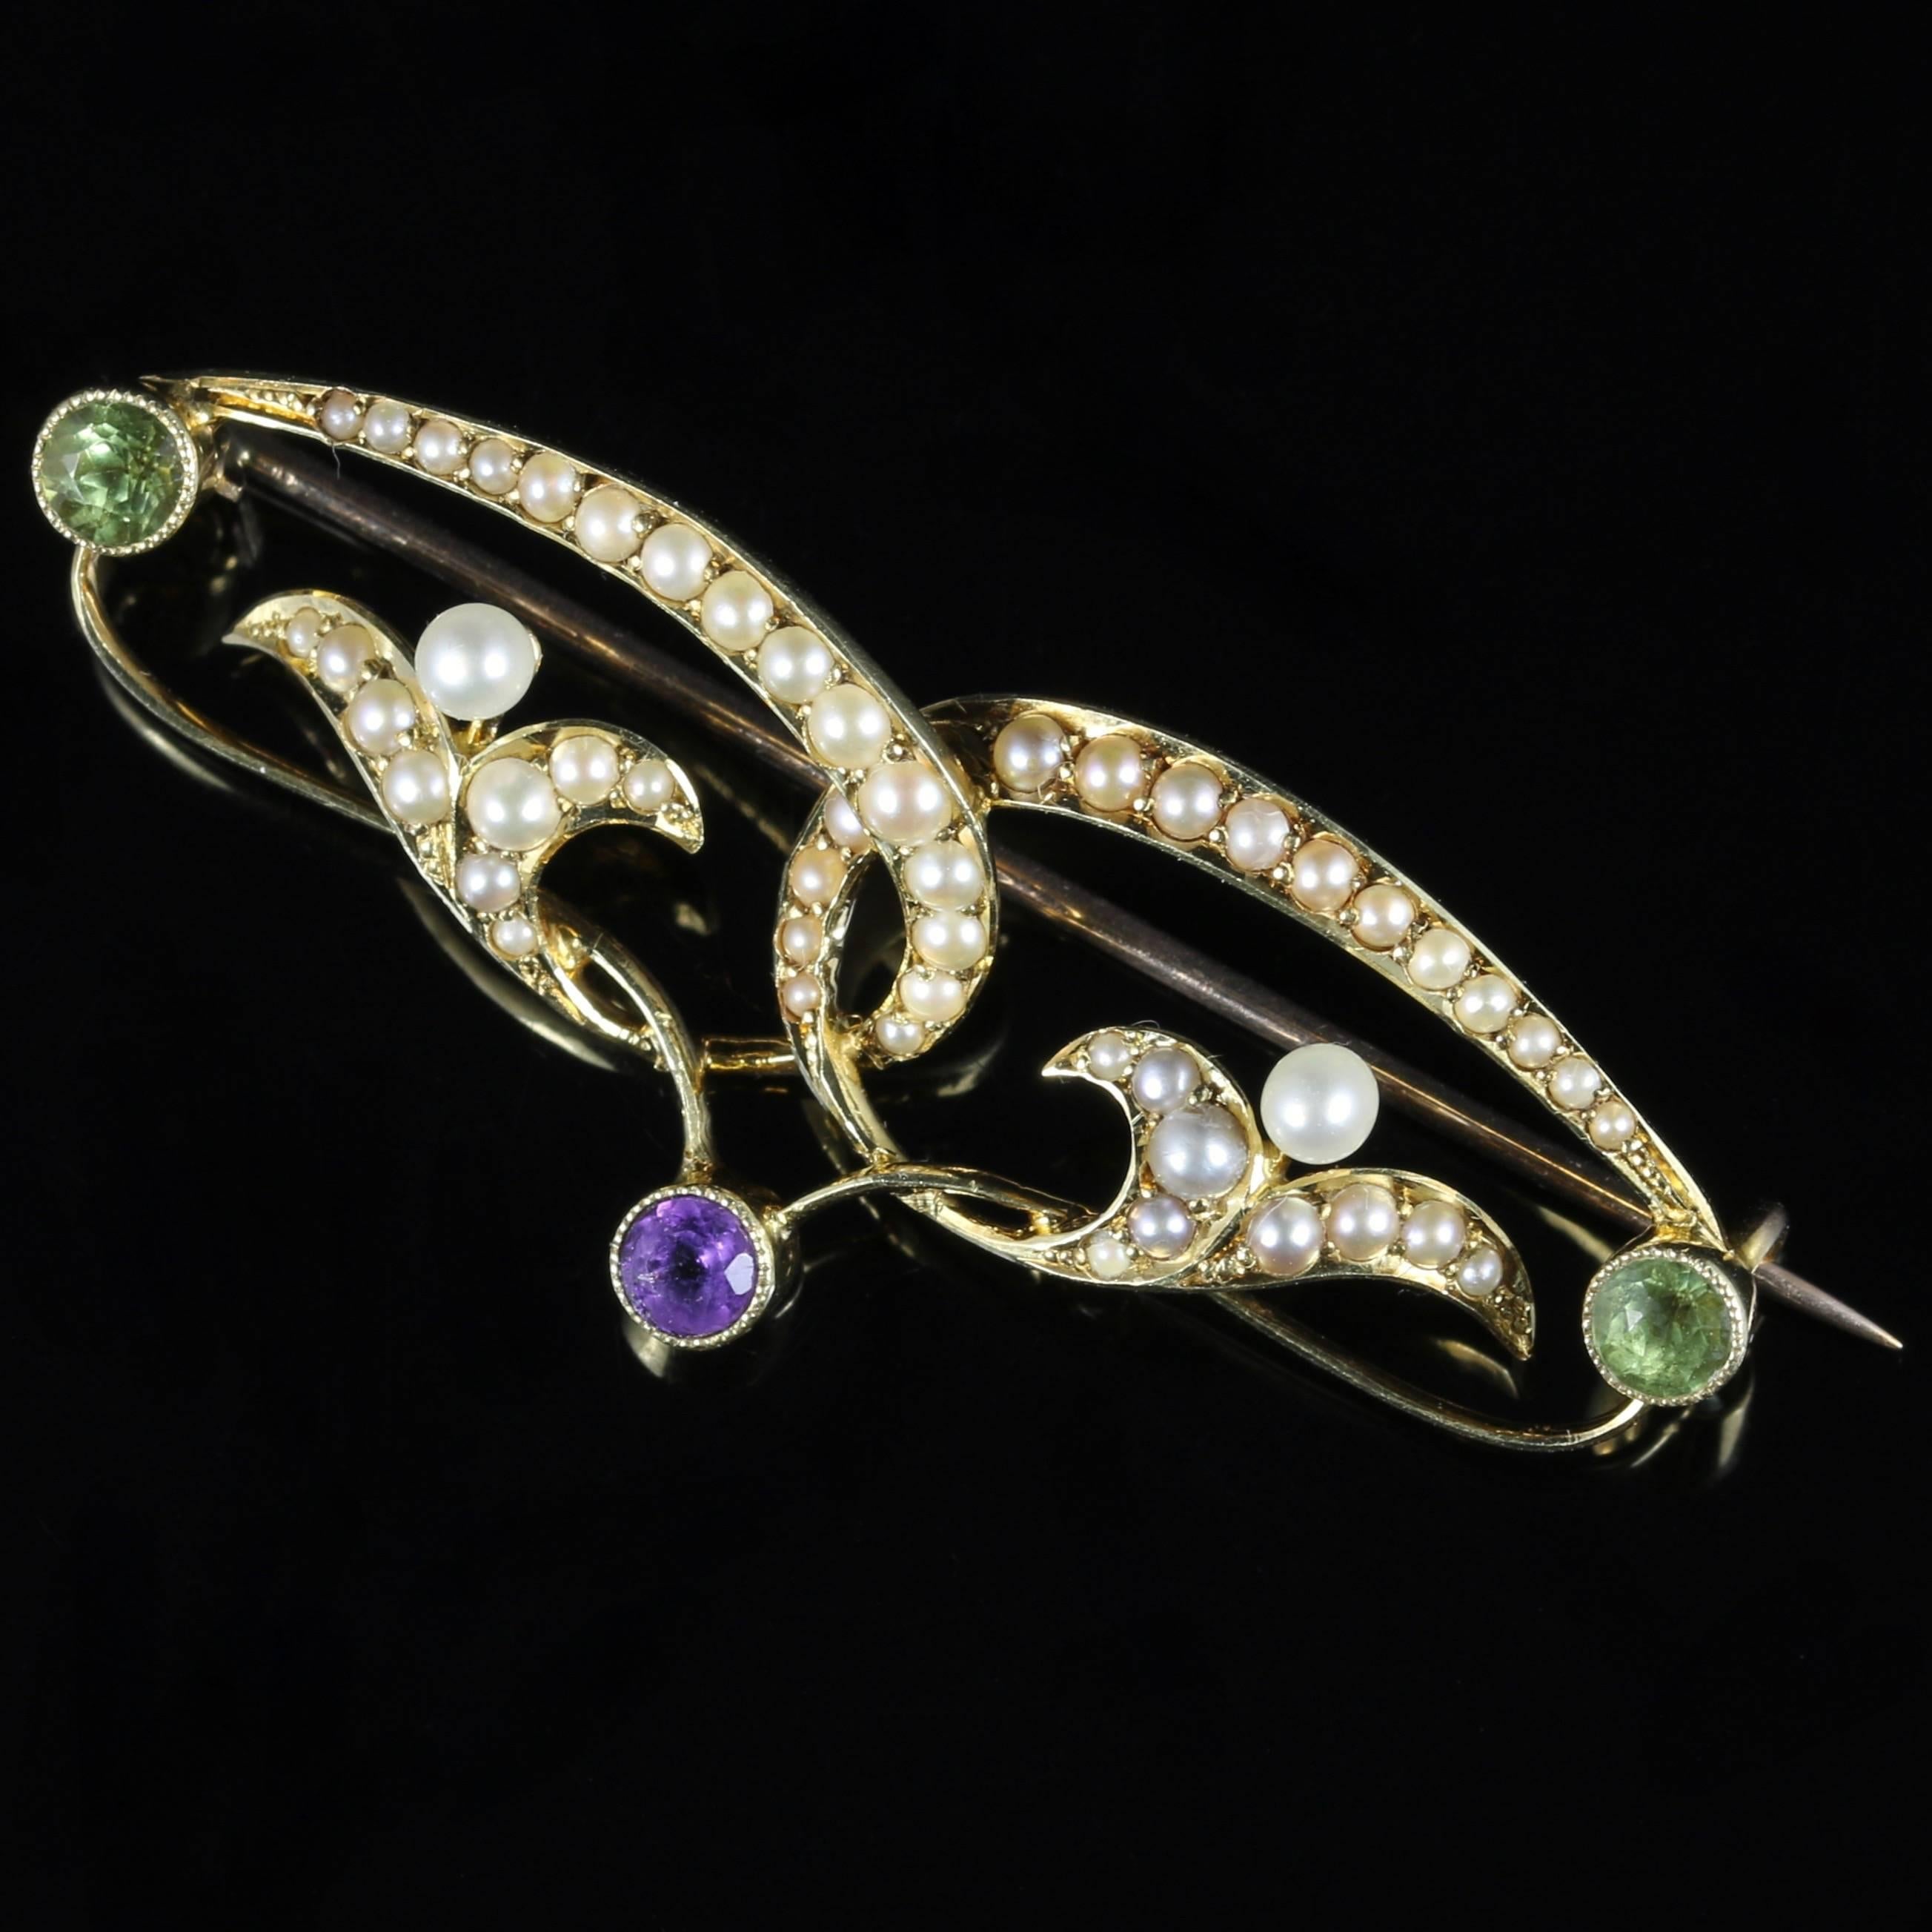 For more details please click continue reading down below..

This fabulous genuine Victorian antique Suffragette brooch is Circa 1900, set in 15ct Gold.

Beautiful detail adorns this brooch with creamy Pearls cascading over the top and crossing over